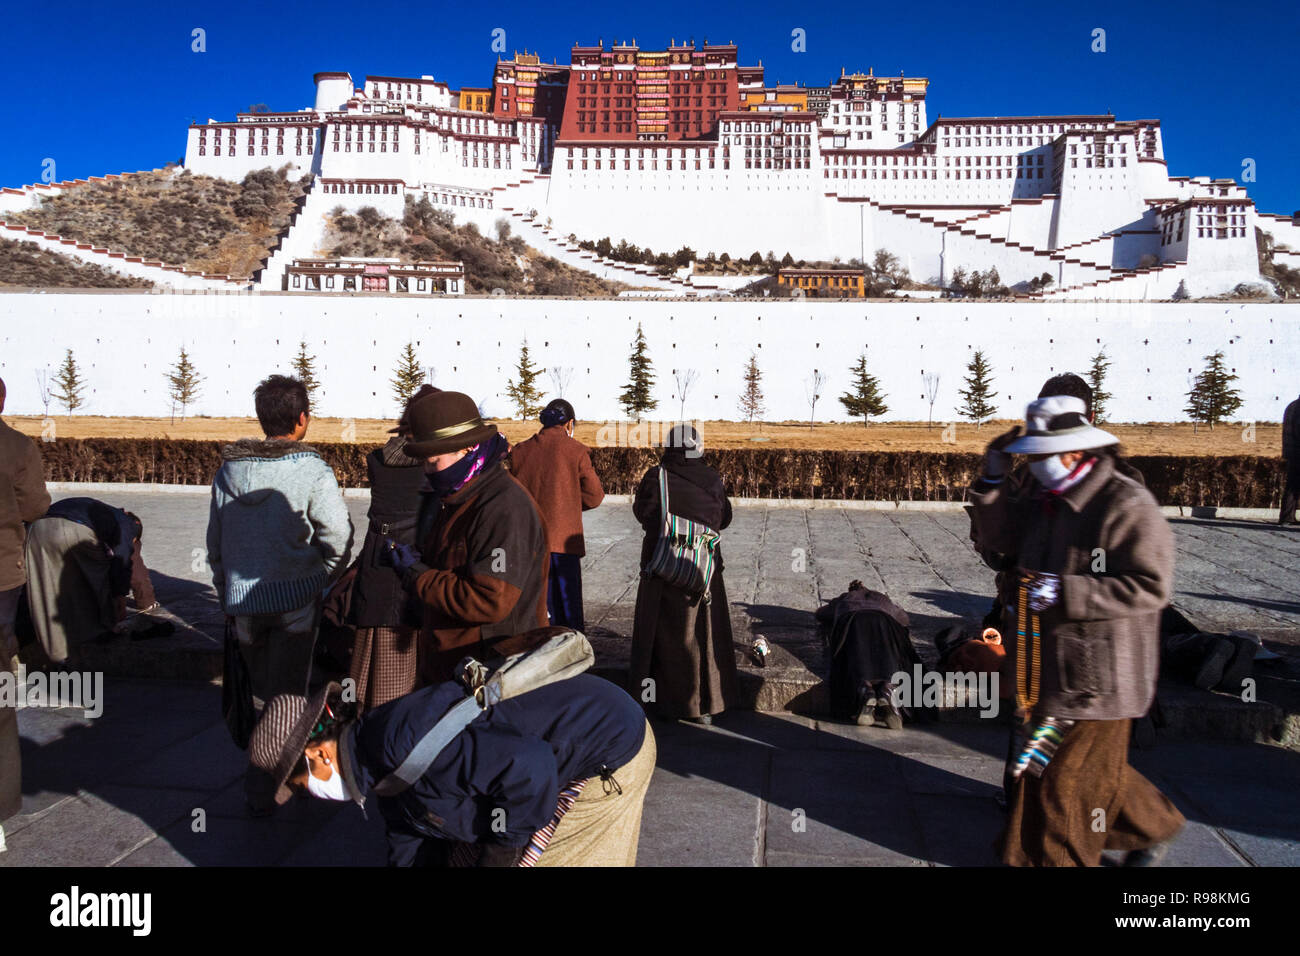 Lhasa, Tibet Autonomous Region, China : Tibetan people perform the kora Buddhist pilgrimage around the Potala Palace. First built in 1645 by the 5th D Stock Photo